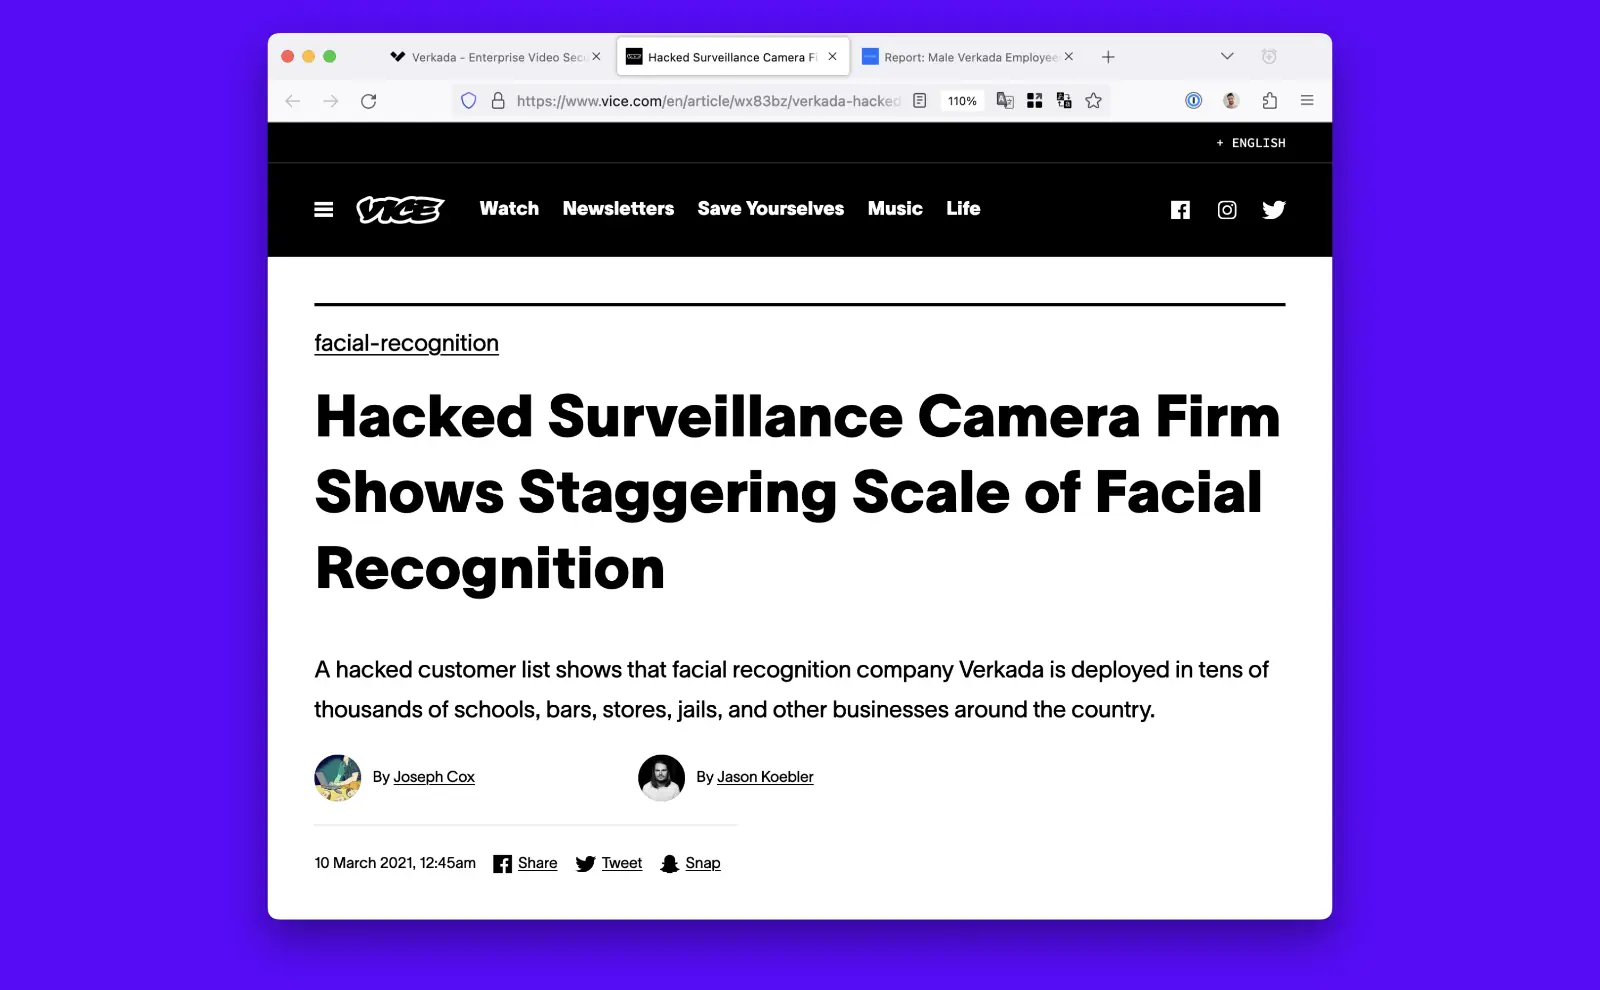 Screenshot of Vice article. Hacked Surveillance Camera Firm Shows Staggering Scale of Facial Recognition. A hacked customer list shows that facial recognition company Verkada is deployed in tens of thousands of schools, bars, stores, jails, and other businesses around the country.